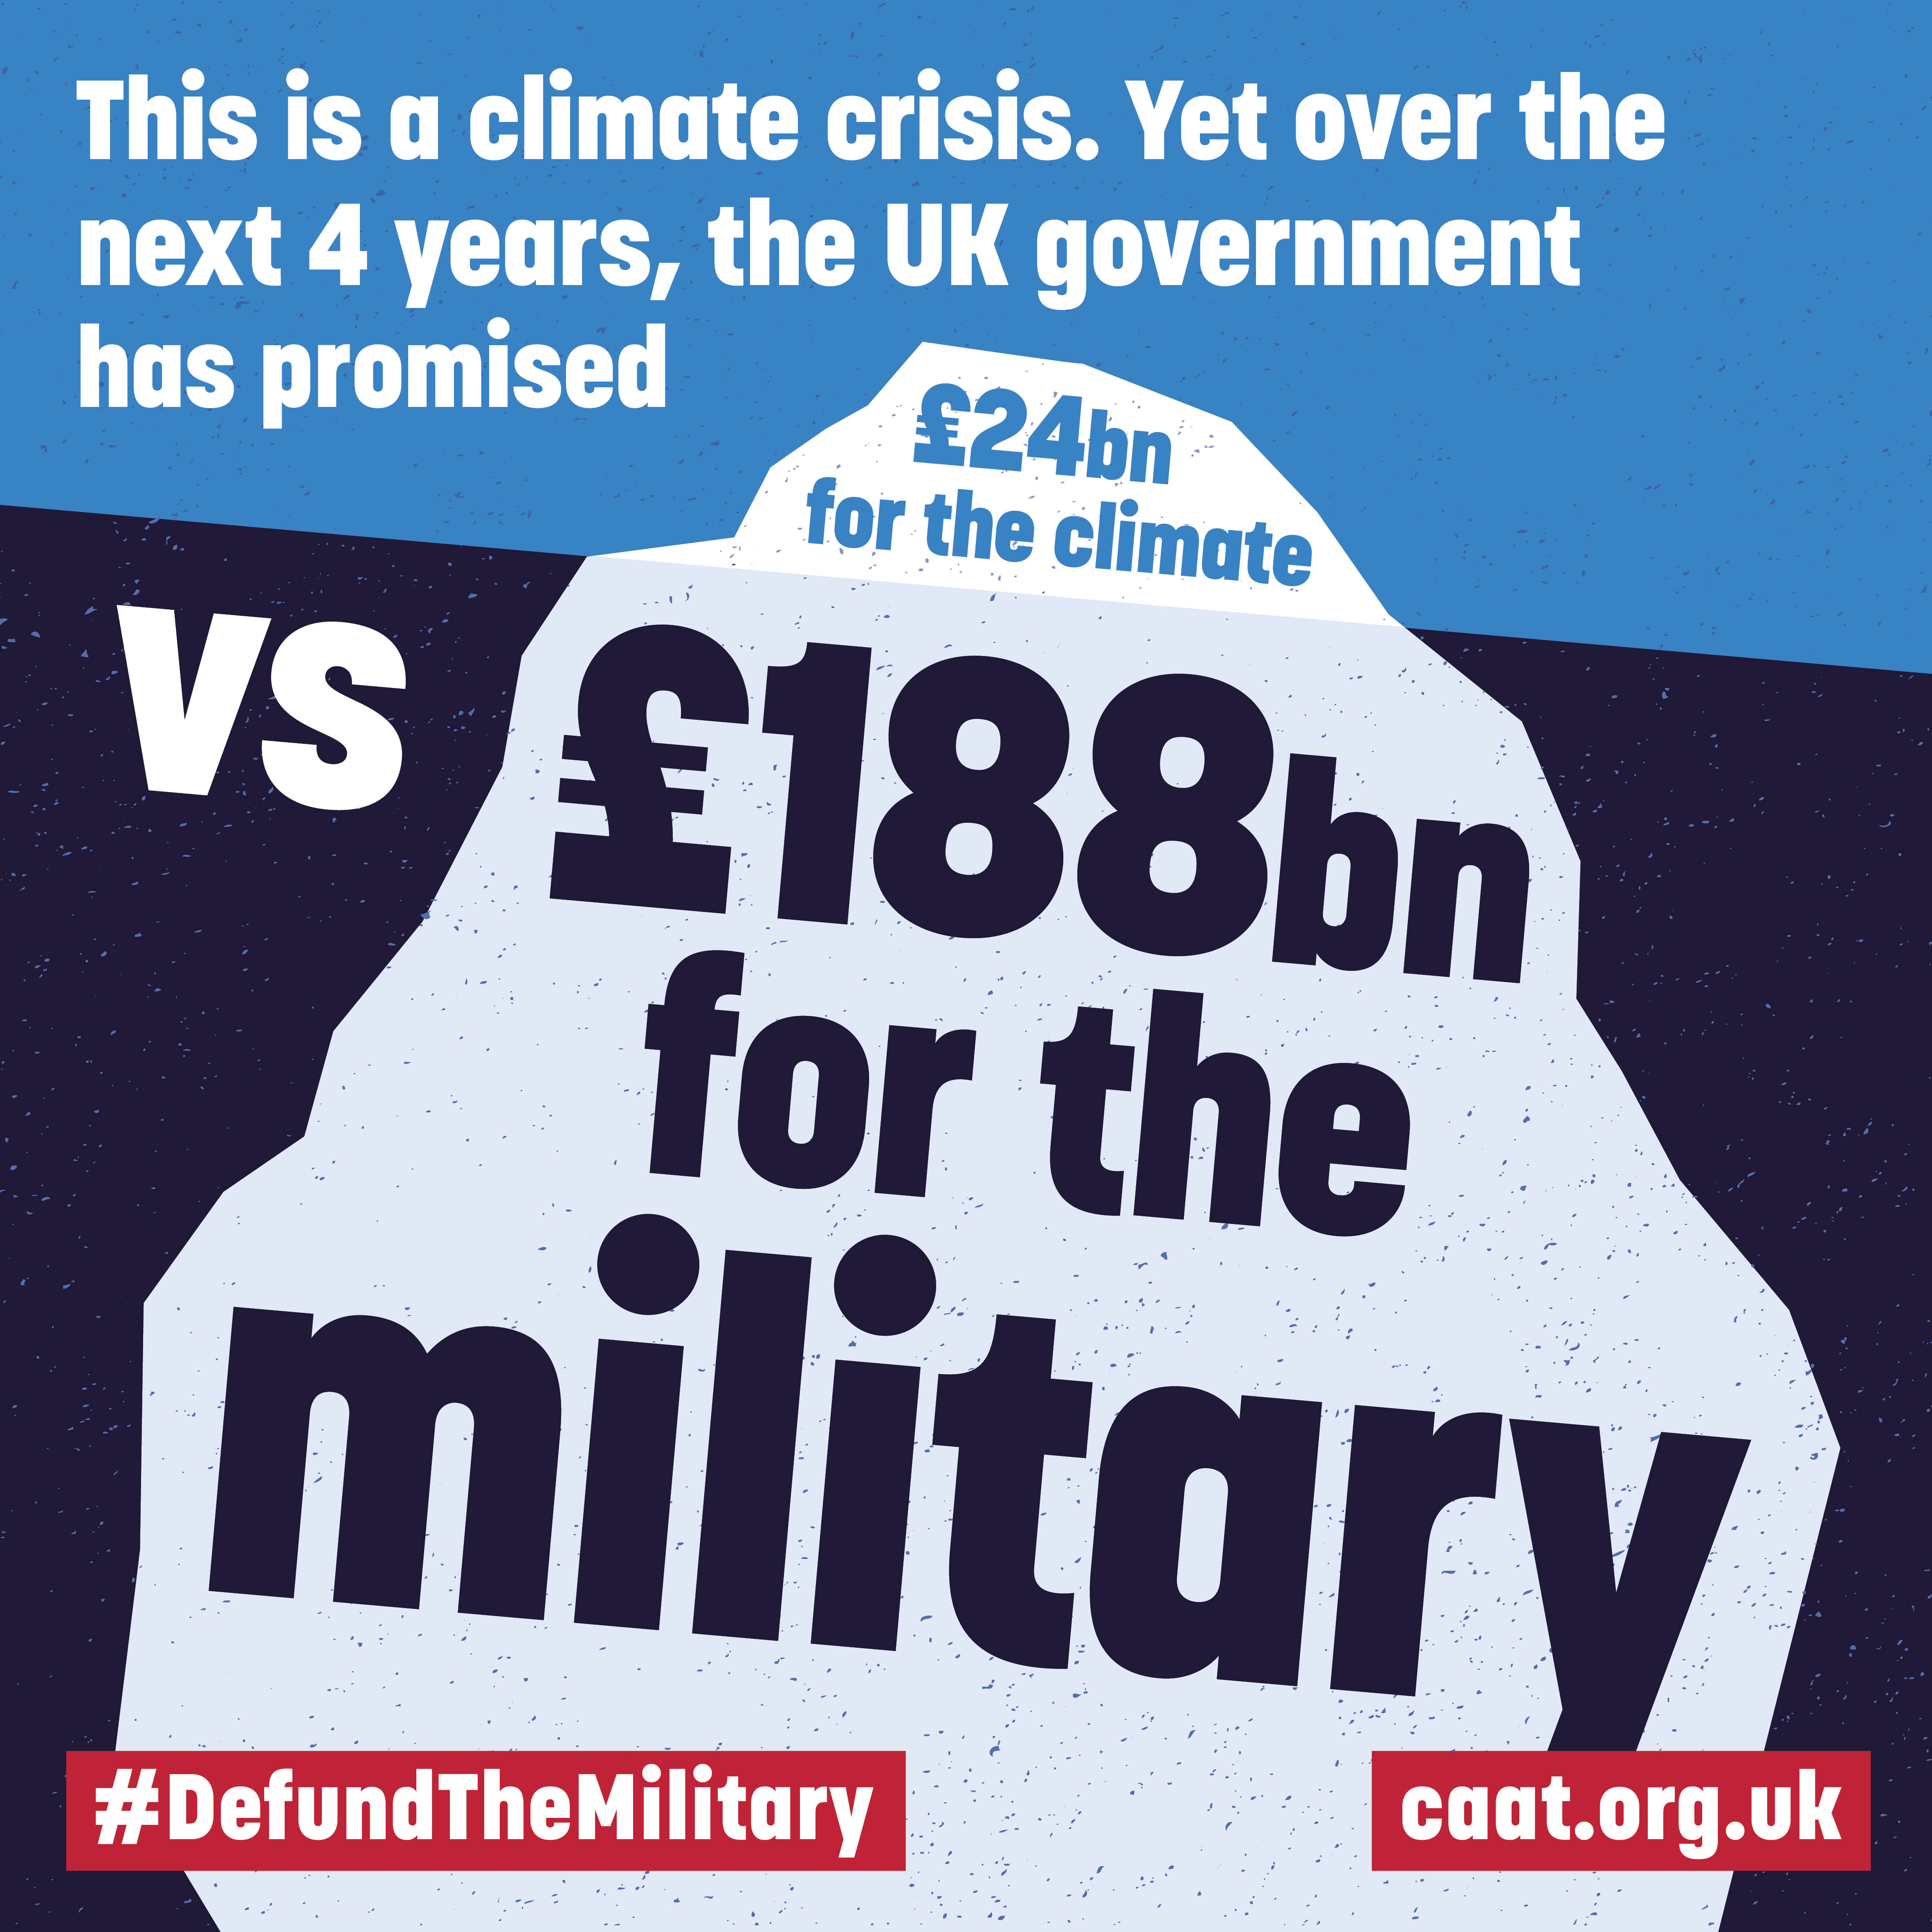 Graphic showing UK climate vs military spending as an iceberg, the vast military spending hidden beneath the surface.